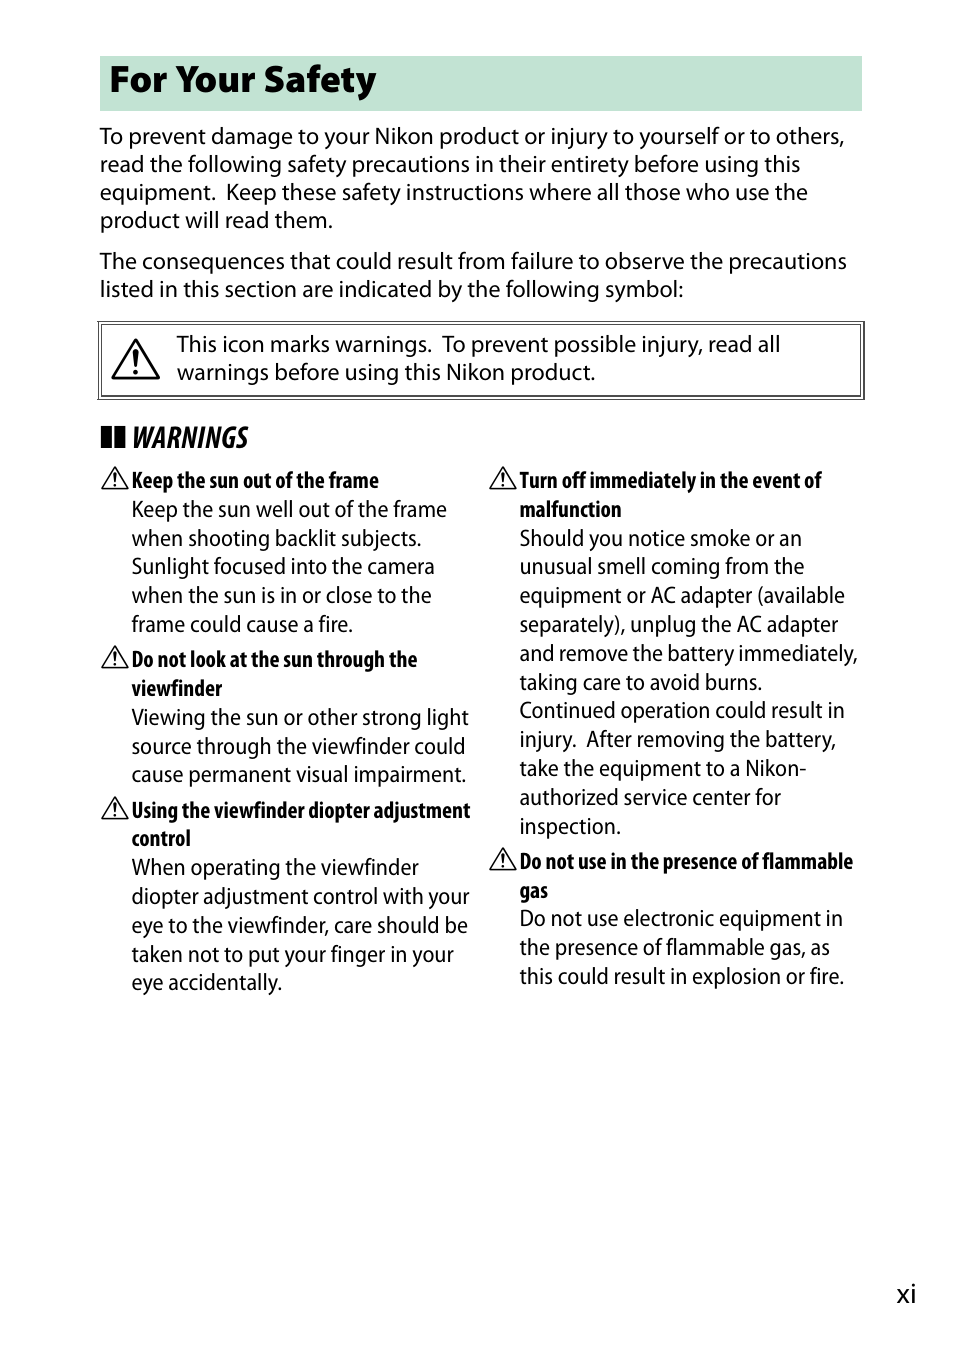 For your safety, Warnings | Nikon D5500 User Manual | Page 13 / 436